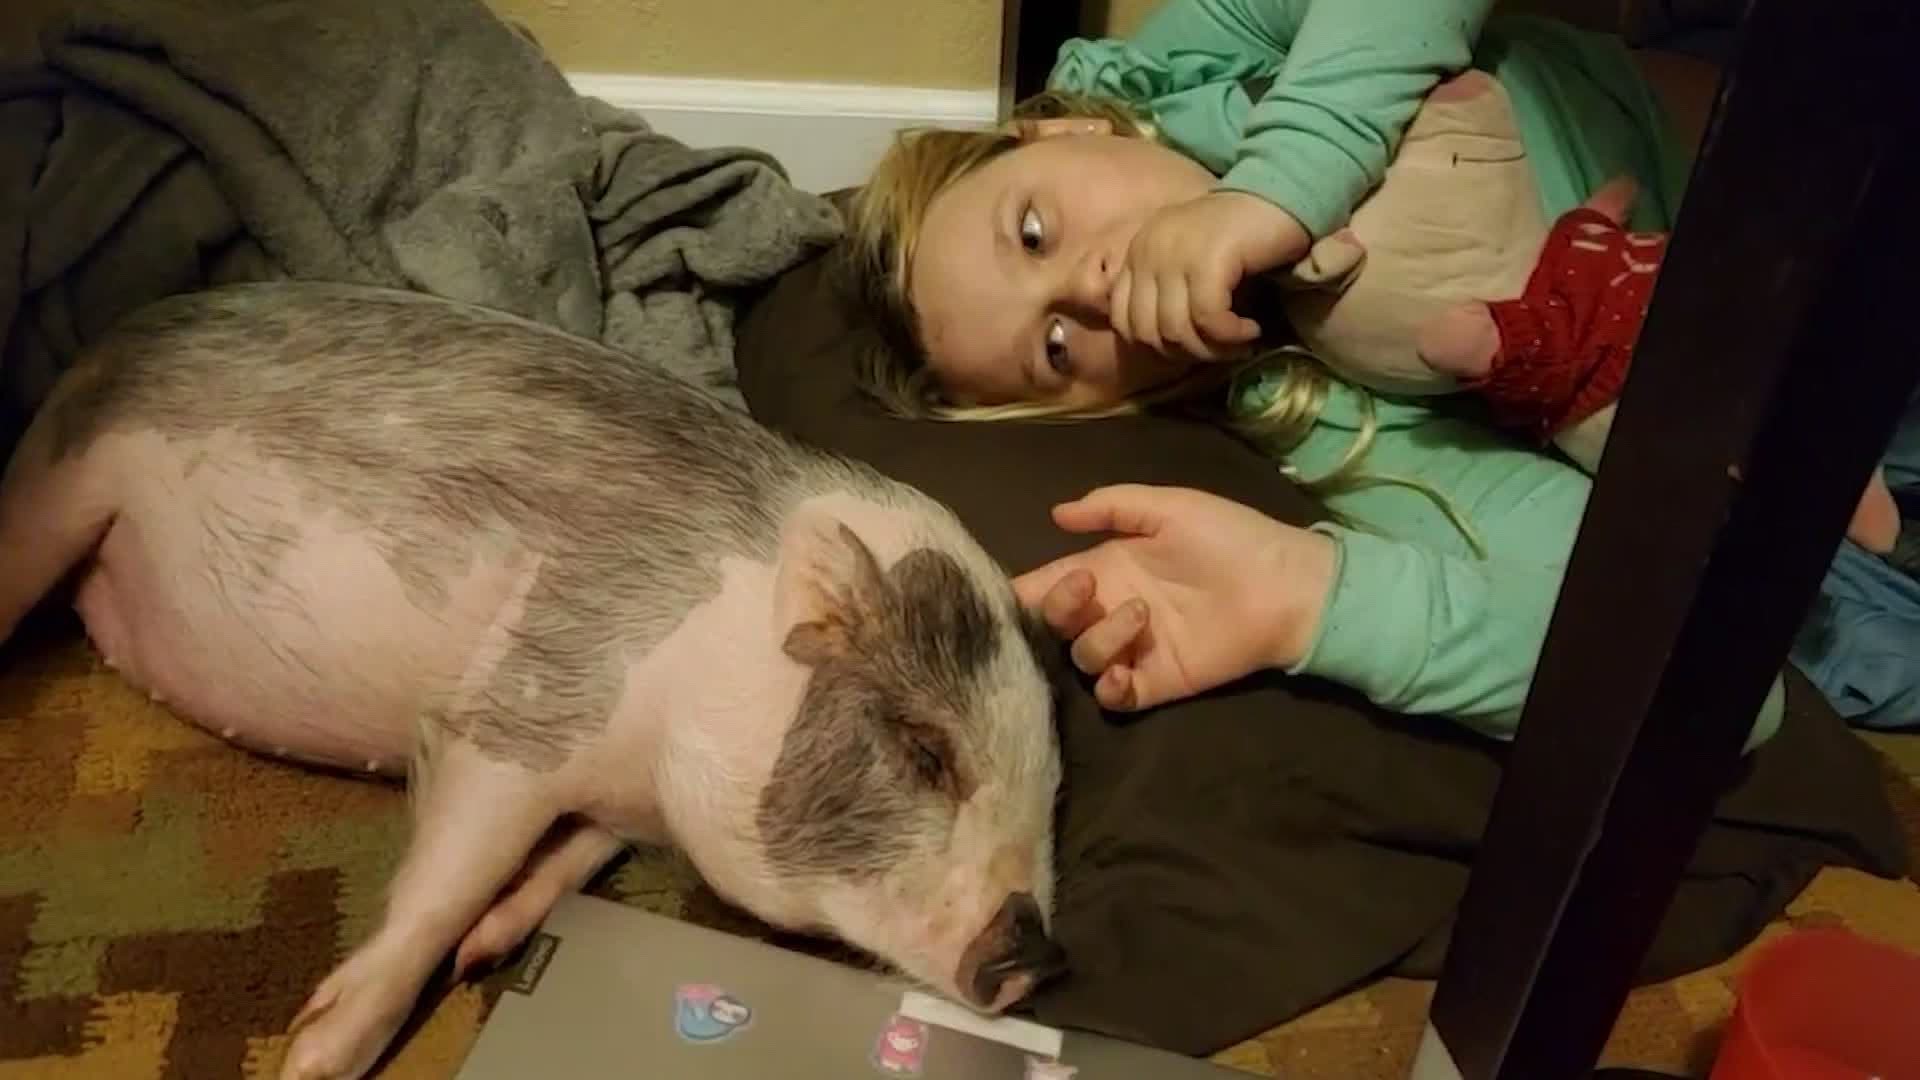 A California family visiting Houston is mourning the  loss of their emotional support pig. Honey was inside their car when it was stolen from a hotel.